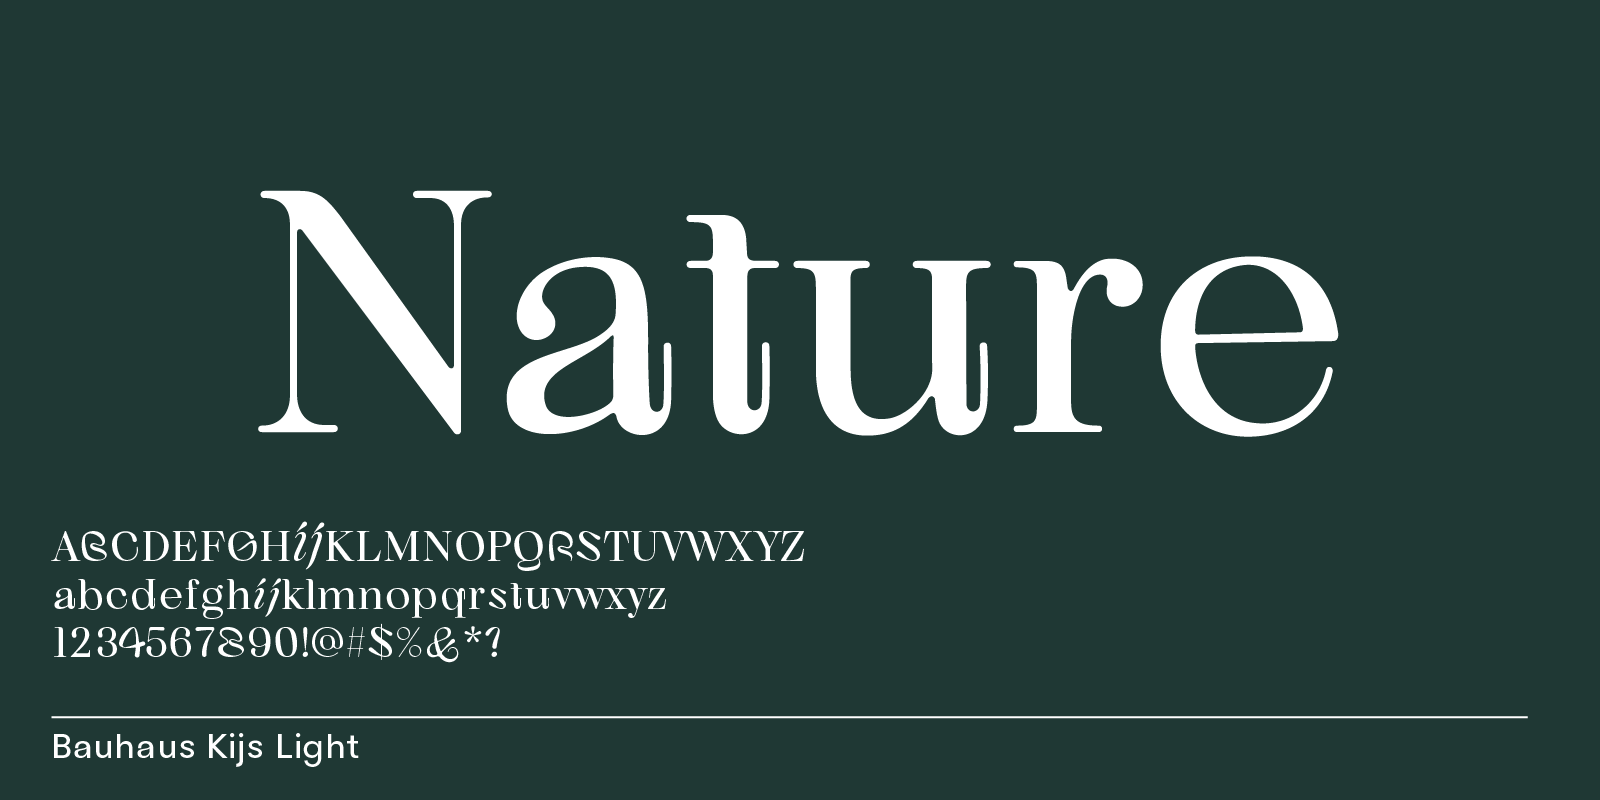 Kijs, nature font in light weight